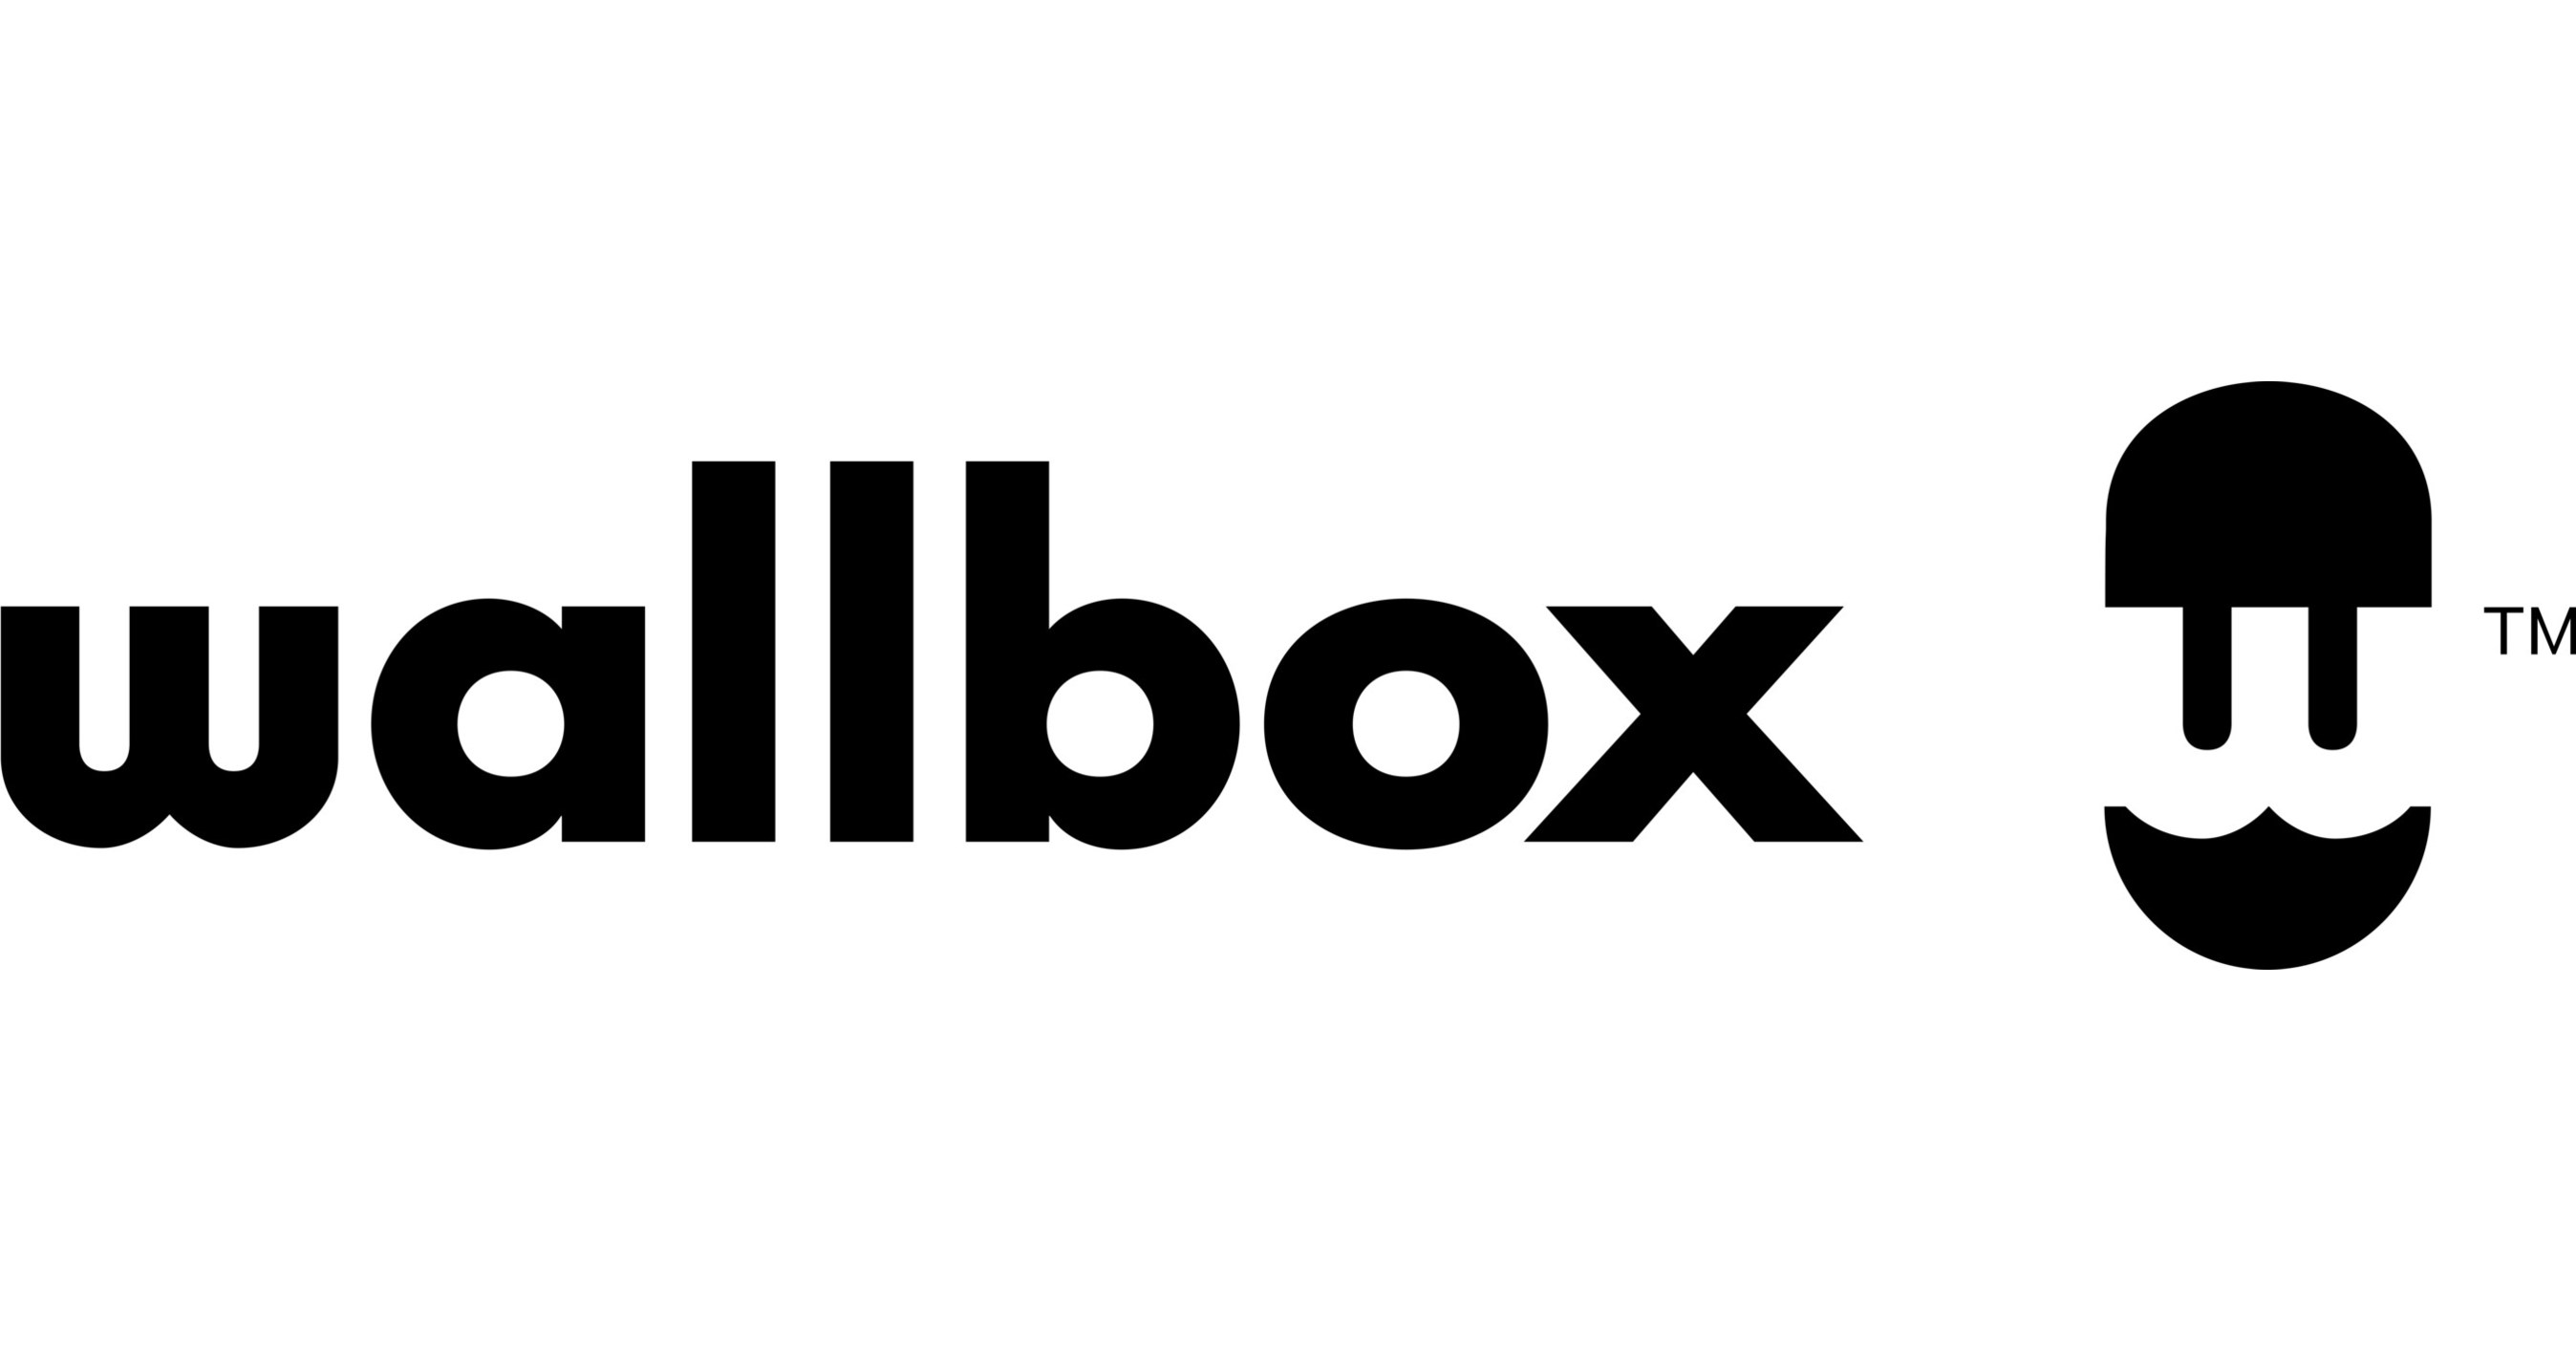 Smart Charging And Energy Solutions Provider Wallbox To List On